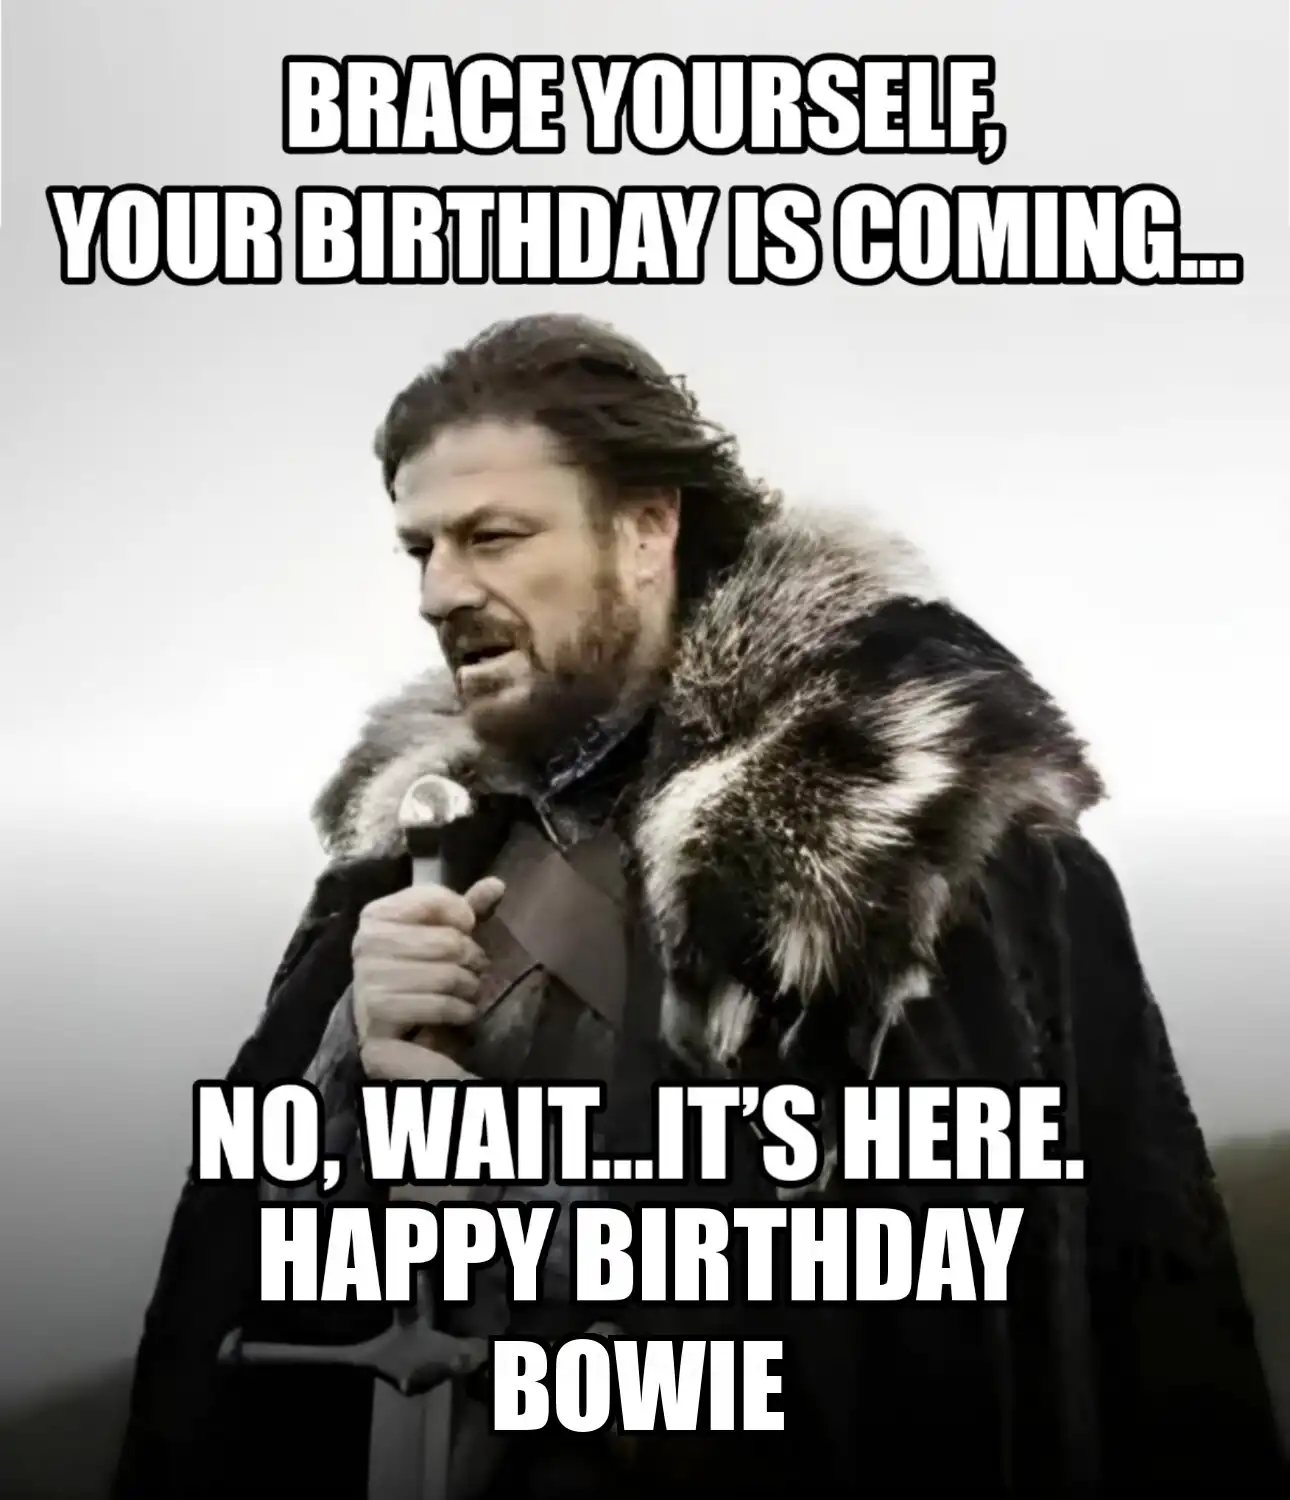 Happy Birthday Bowie Brace Yourself Your Birthday Is Coming Meme